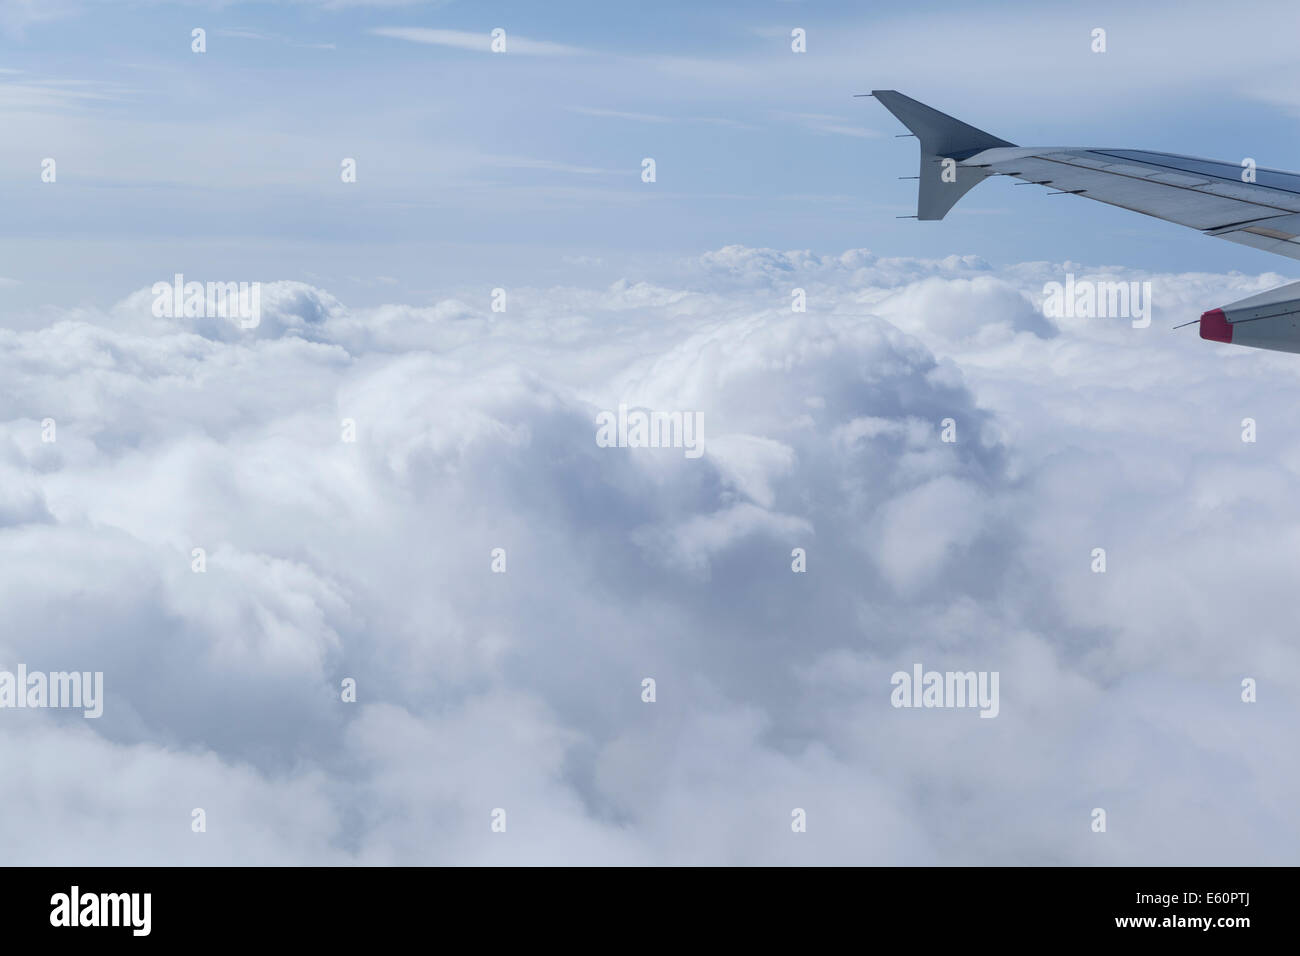 Plane wing above cloud formation Stock Photo